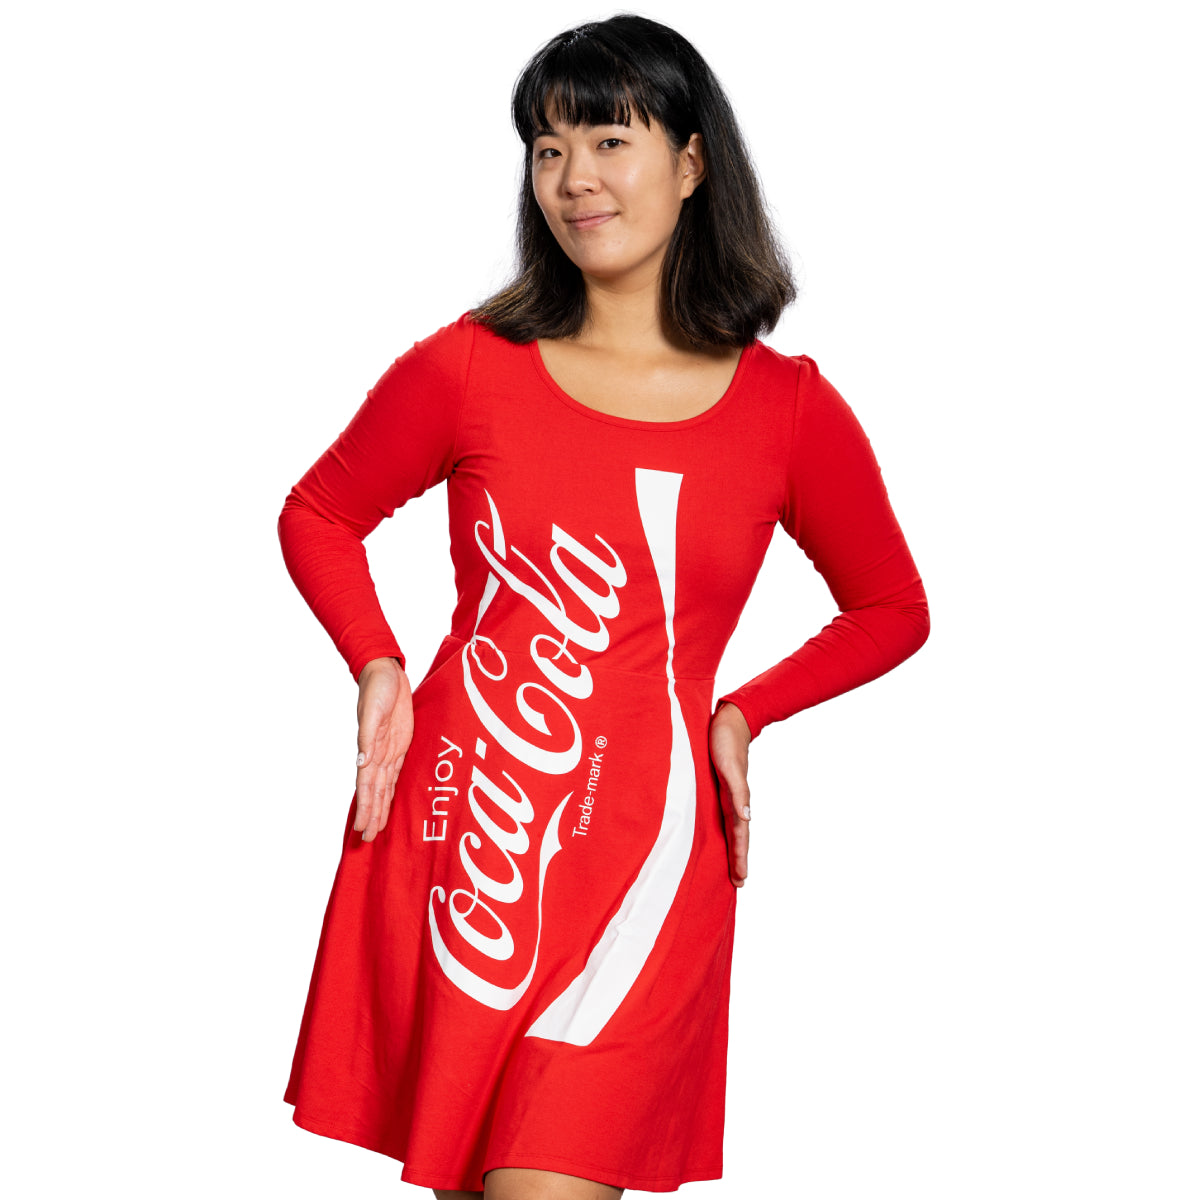 Women's Coca-Cola Skater Dress Cosplay Costume for Parties